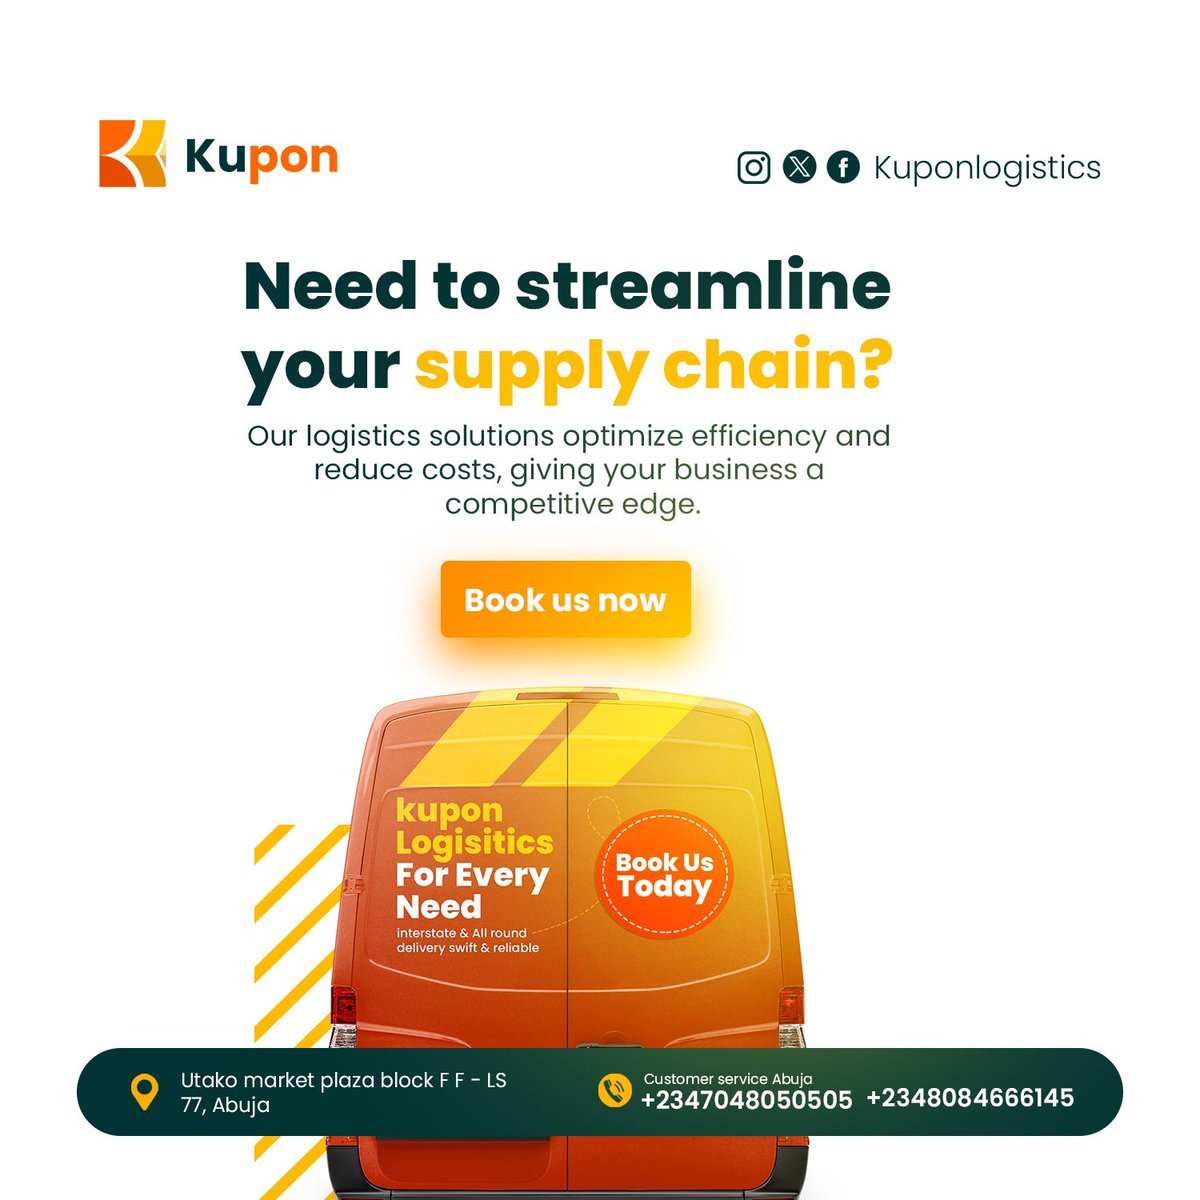 Expand your business with us at Kupon Logistics 

Our logistics solution optimize efficiency and reduce cost giving your business a competitive edge 

Visit our experience centers or download the kupon app to start shipping today. 

#kuponlogistics
#hyperlocaldeliveryapps